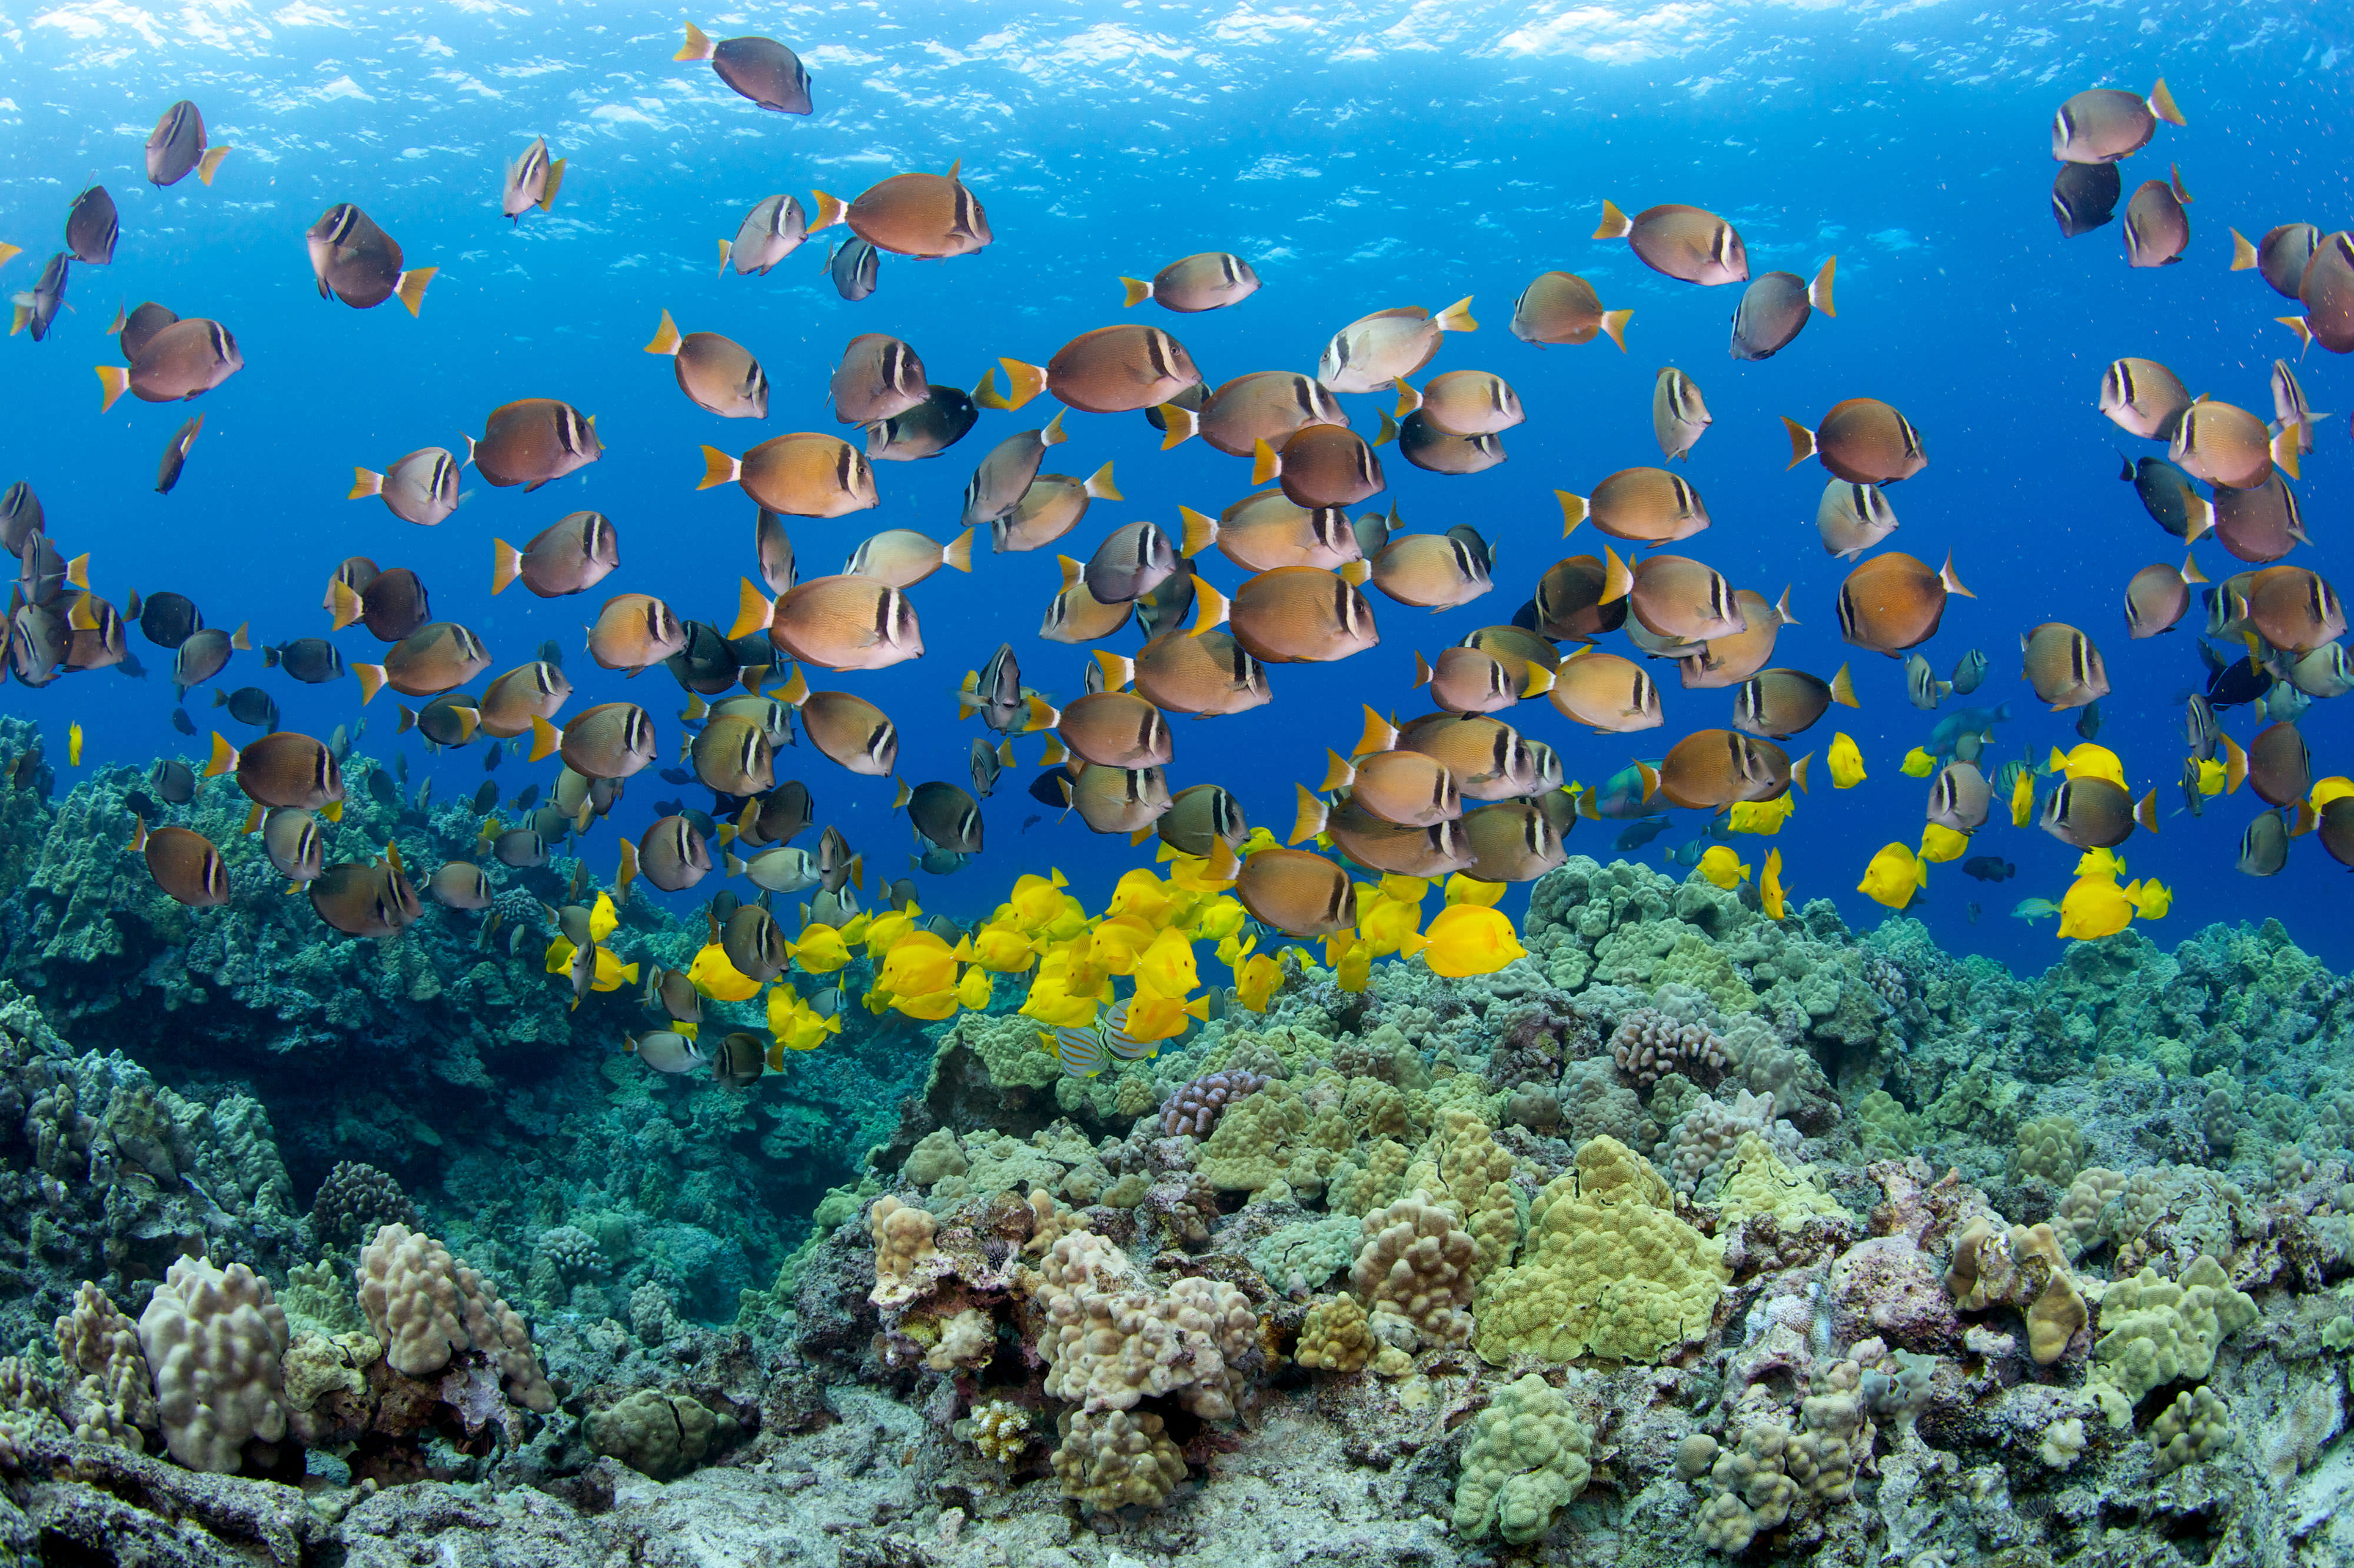 Underwater view of a large school of brightly colored fish swimming around a coral reef in Hawaii.